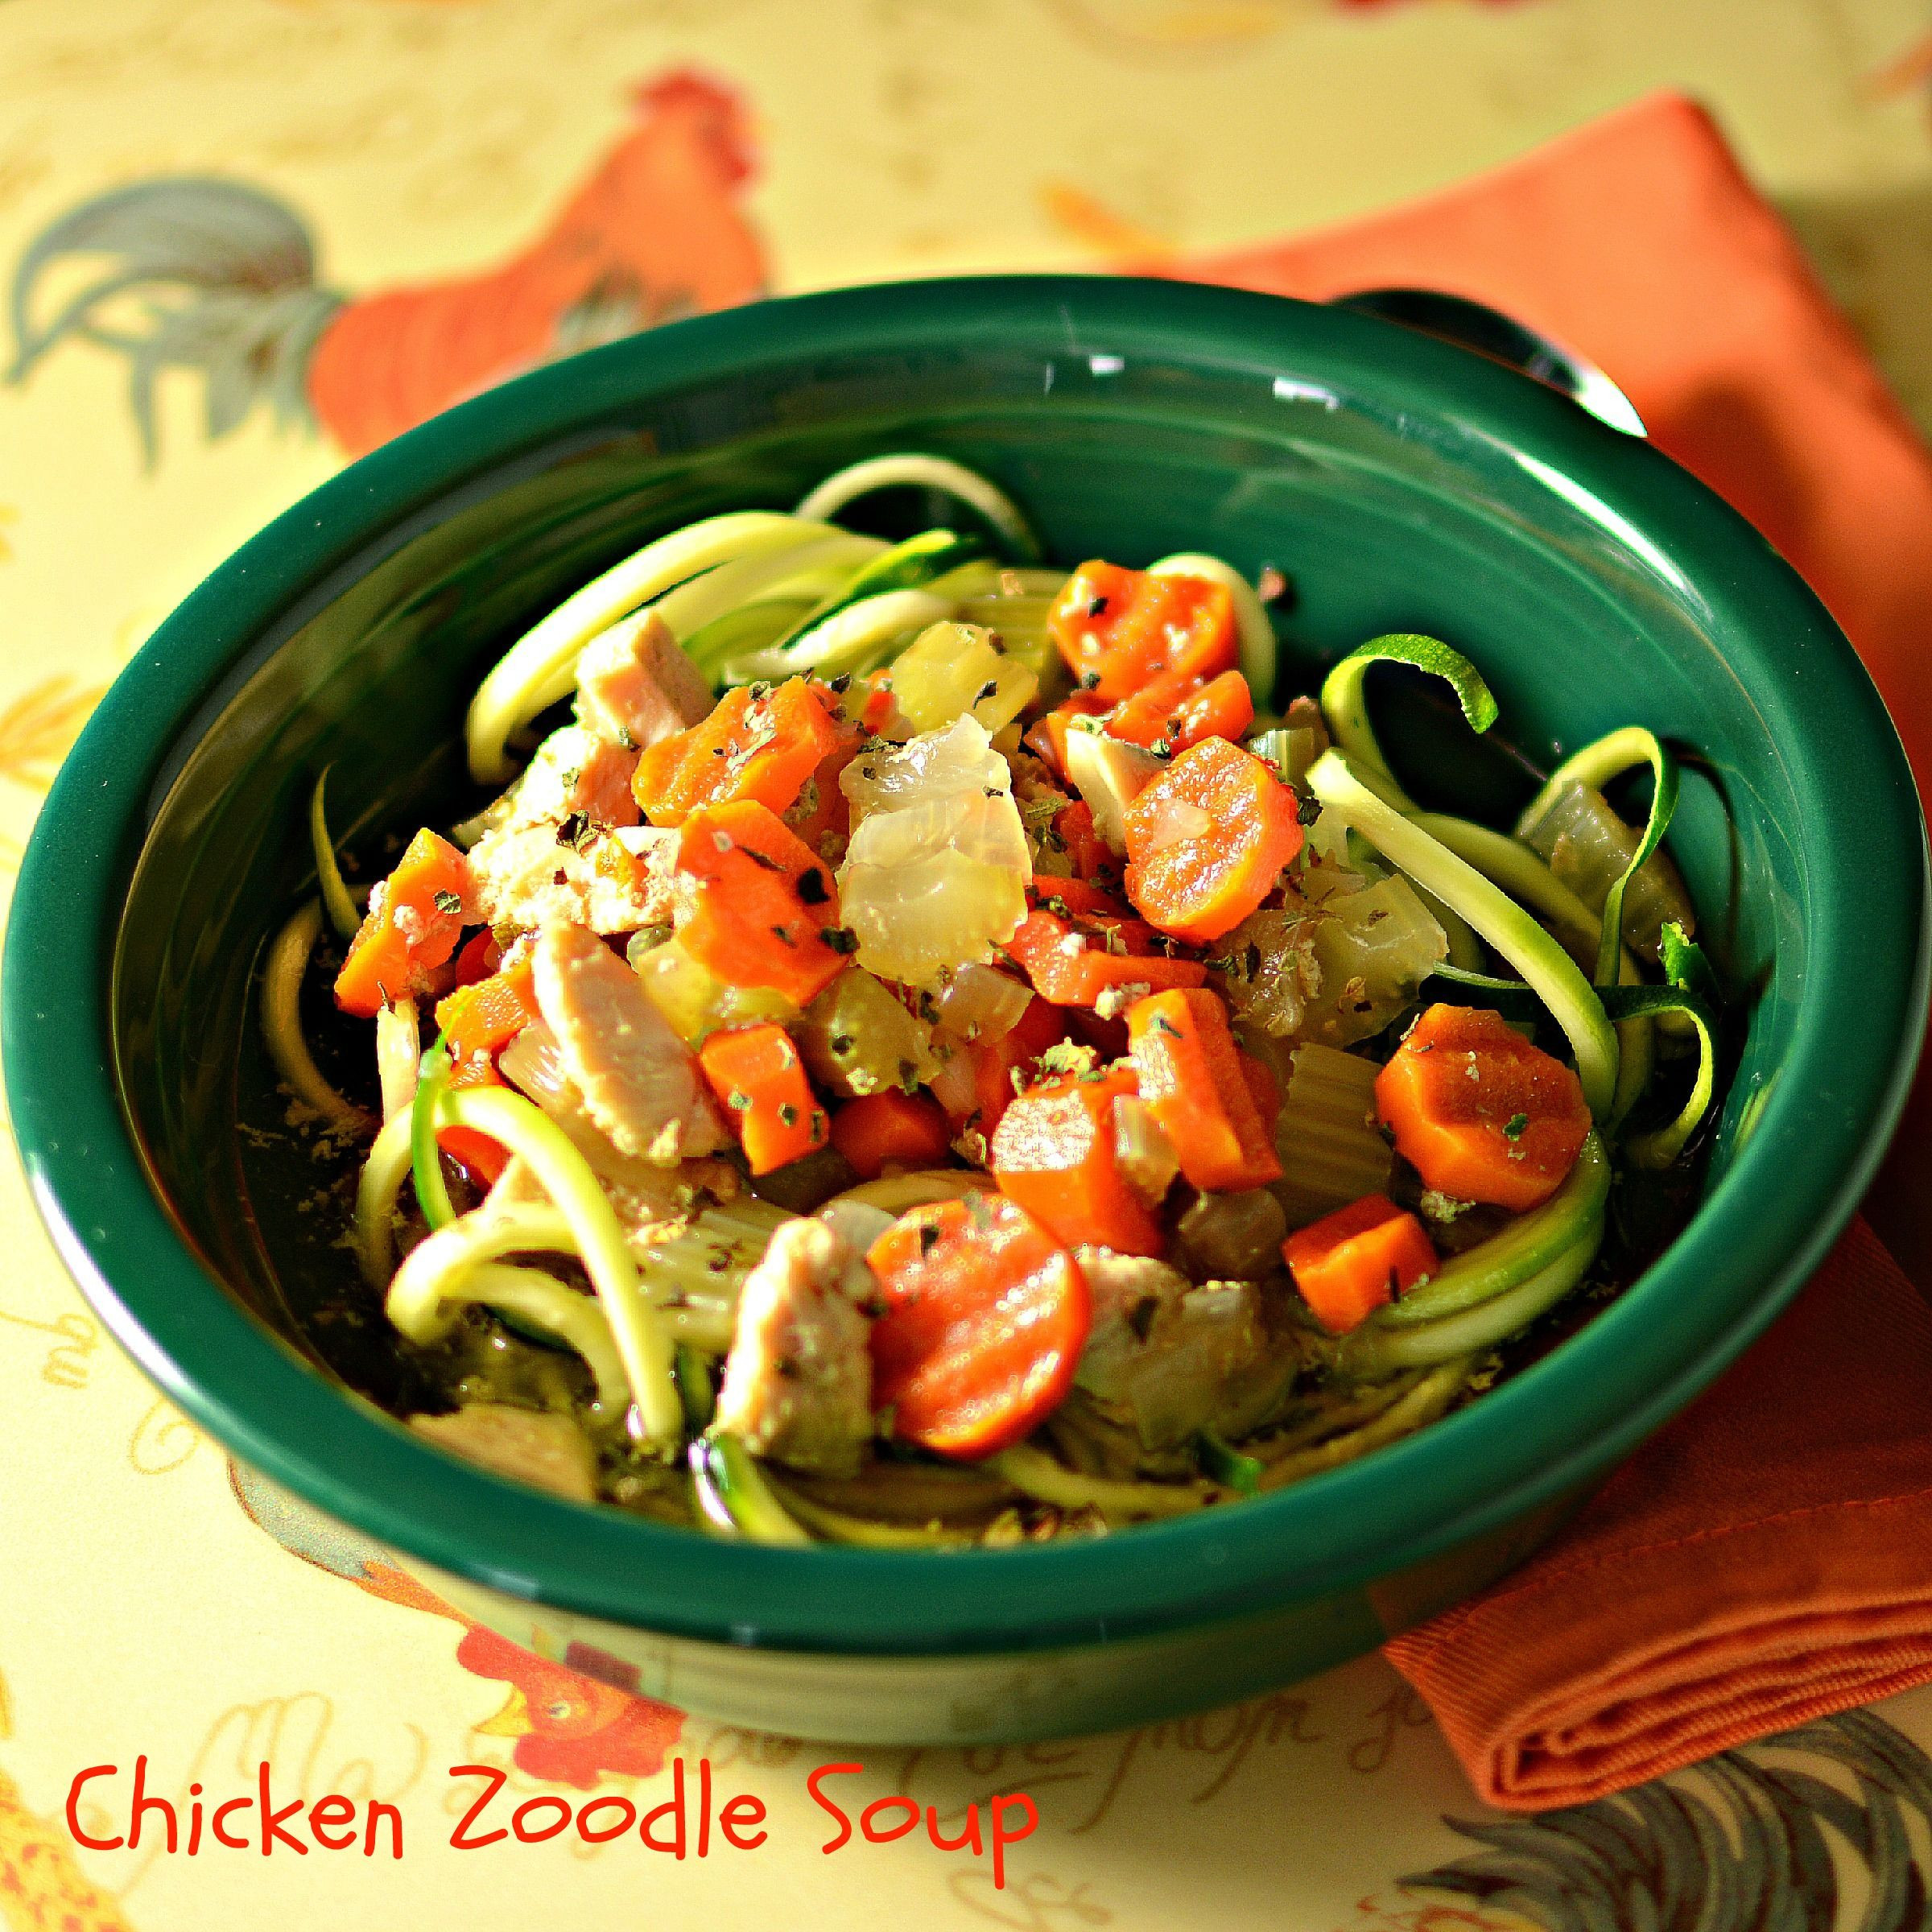 Vegetarian Zoodle Recipes Awesome Chicken Zoodle soup Recipe